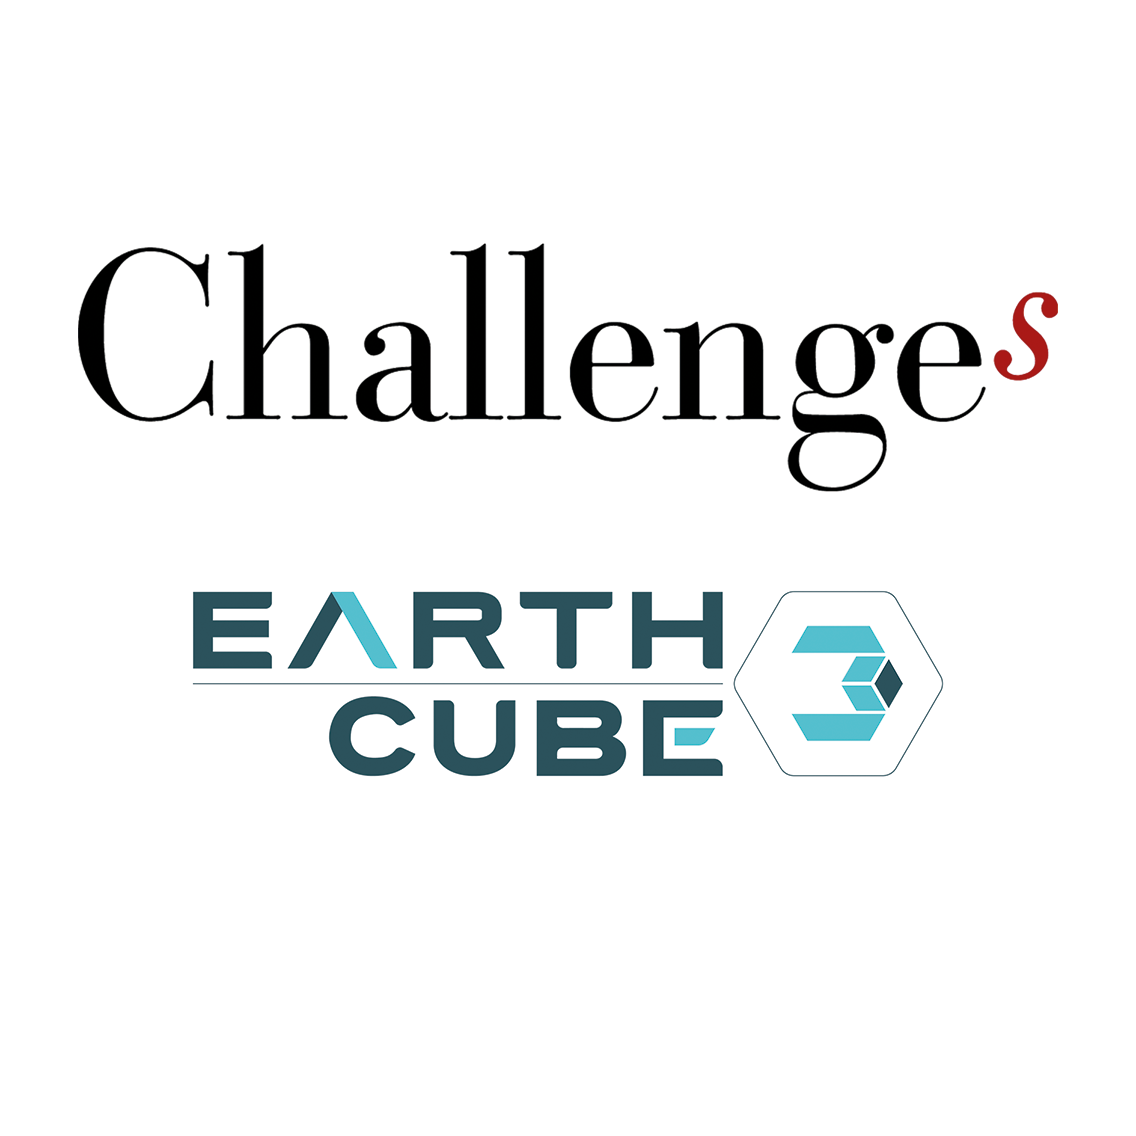 Earthcube overshoots its competitors